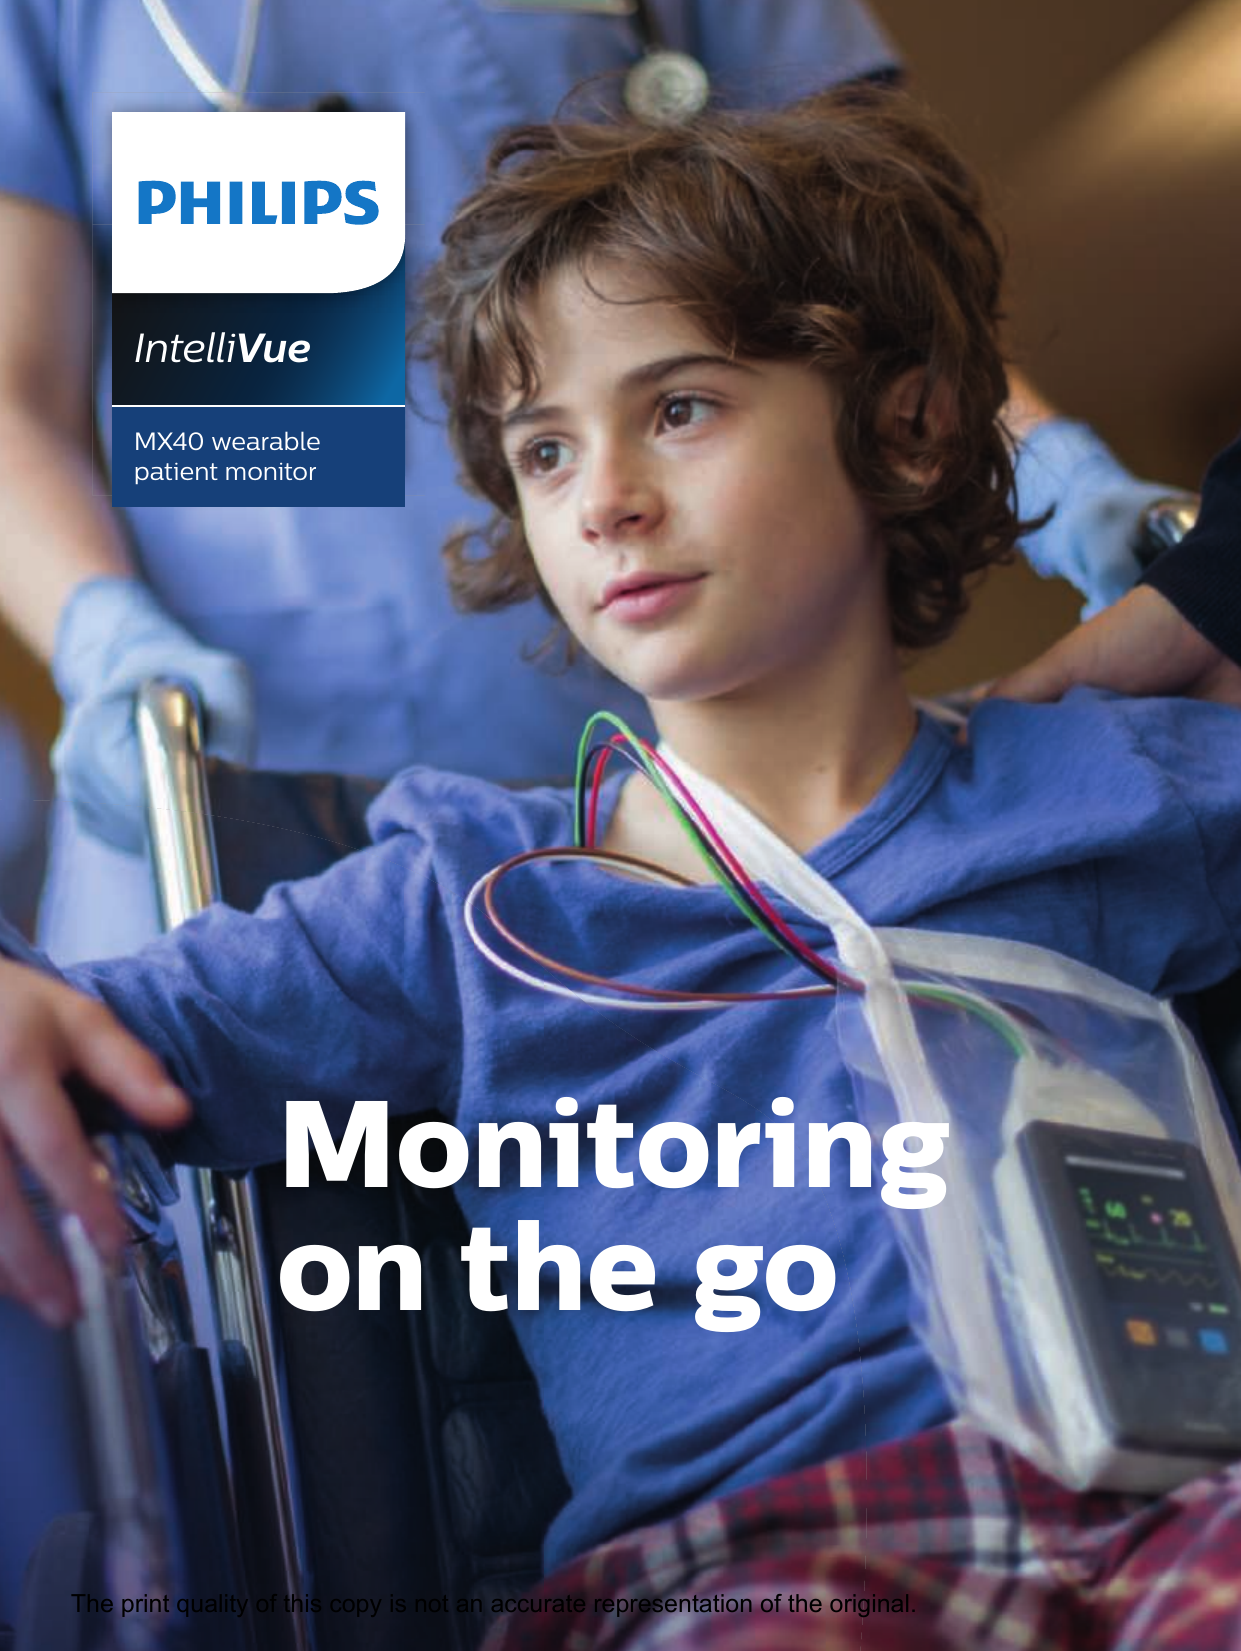 Page 1 of 8 - Philips 865350 452299118501 User Manual Product Brochure Intelli Vue Wearable Patient Monitor MX40 B349908a9e374f02a157a77c016a06b7